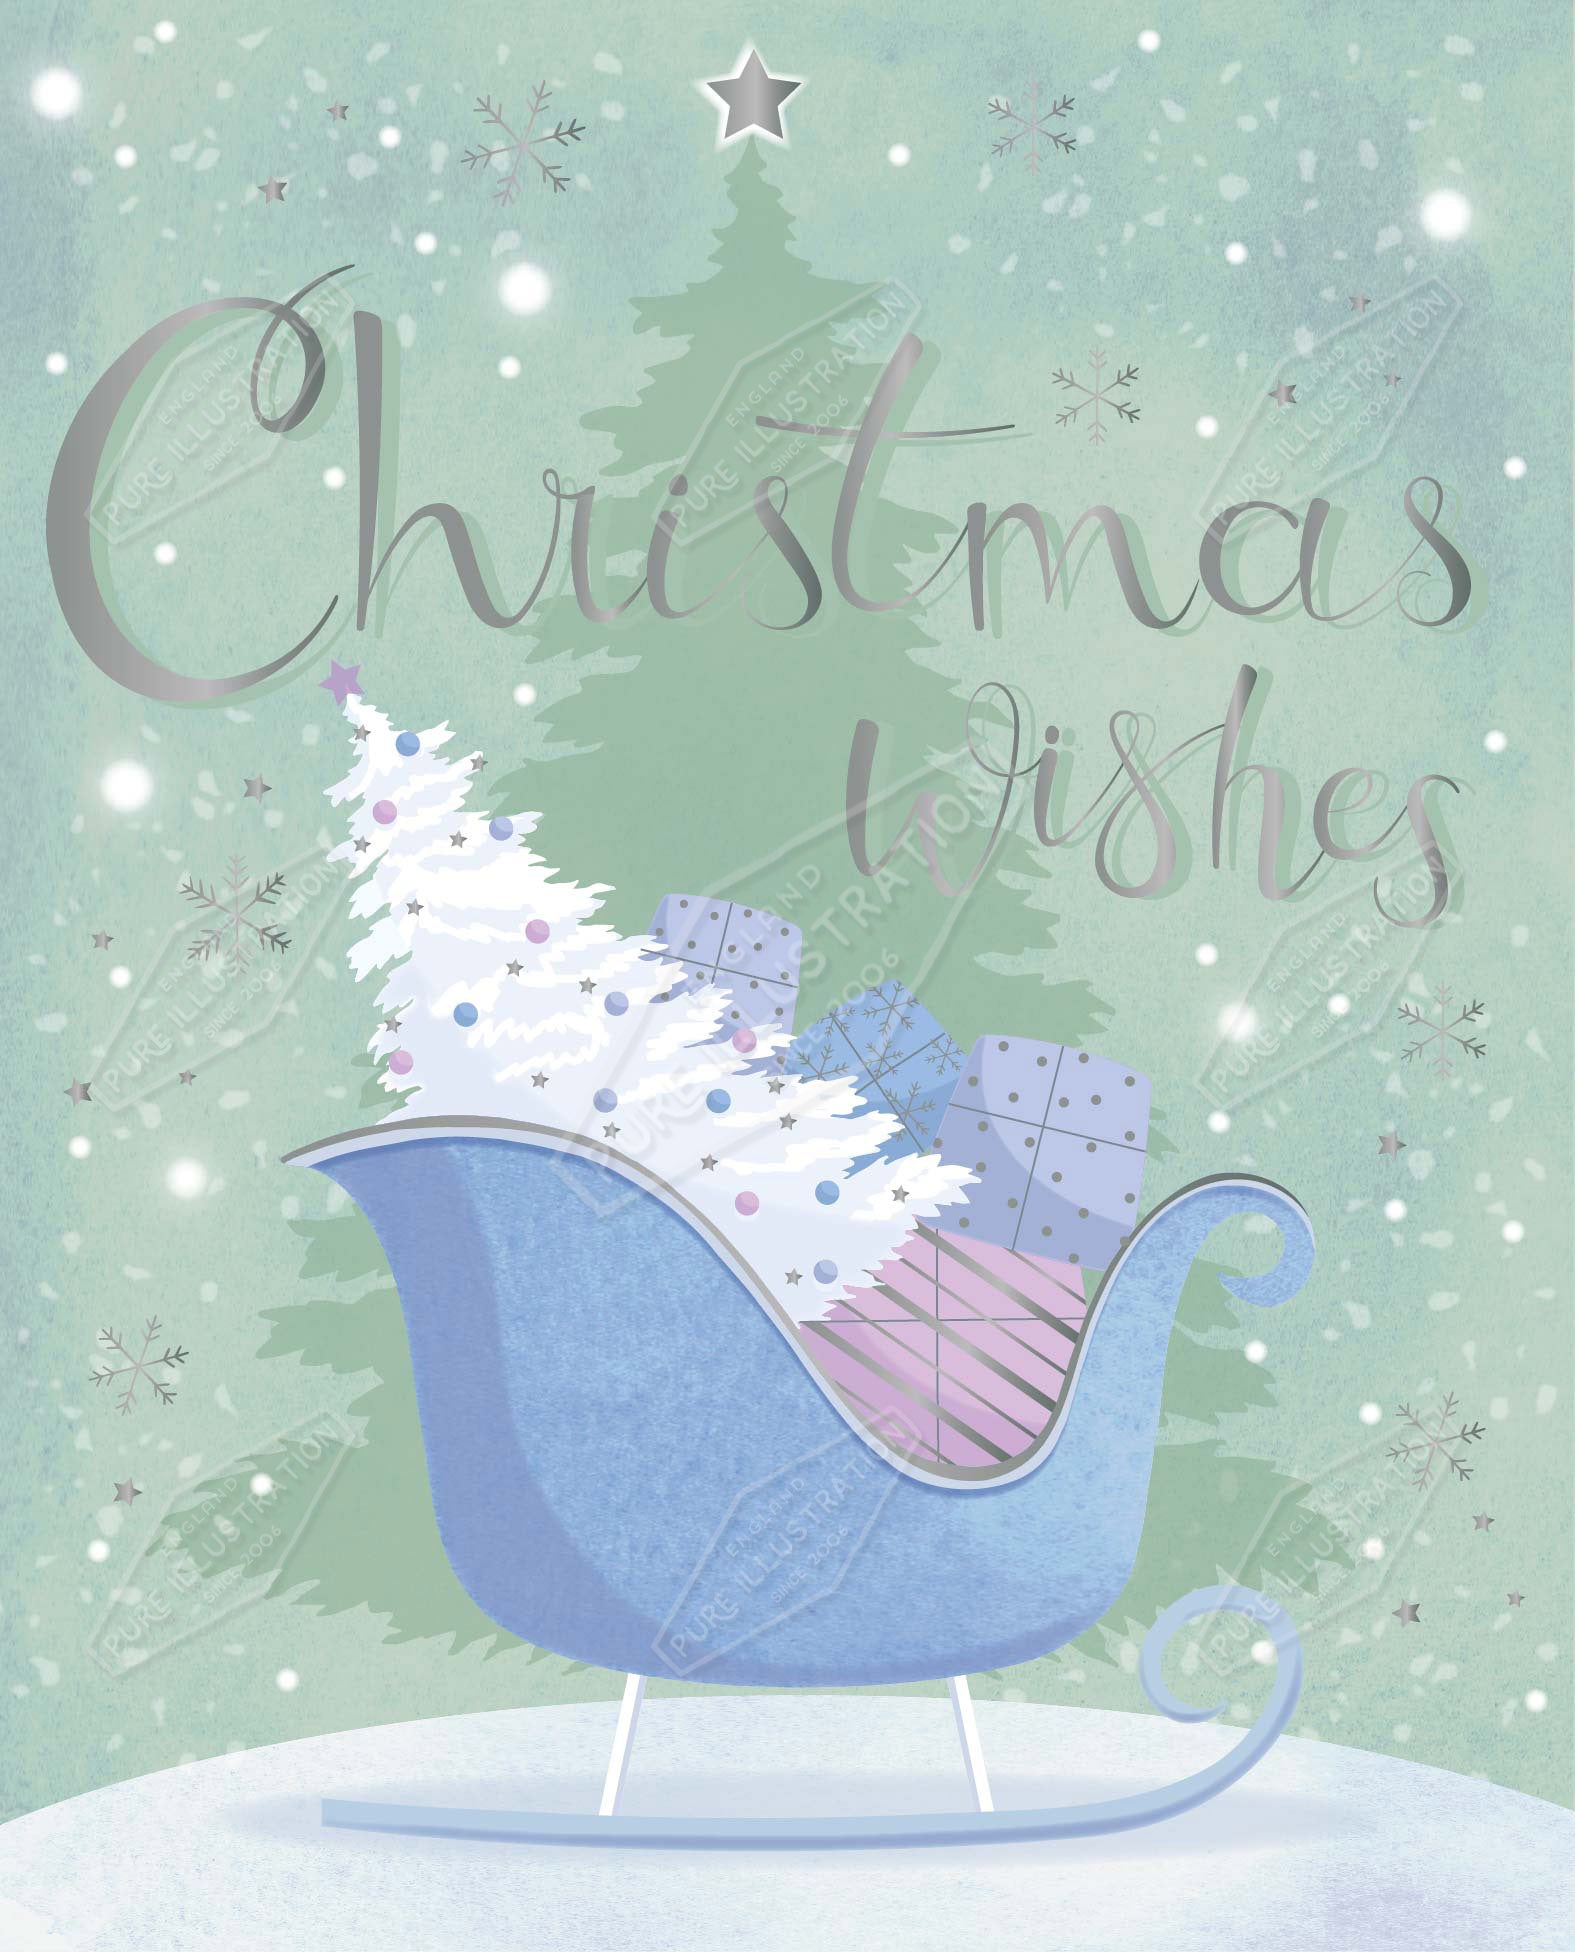 00035171SPI- Sarah Pitt is represented by Pure Art Licensing Agency - Christmas Greeting Card Design